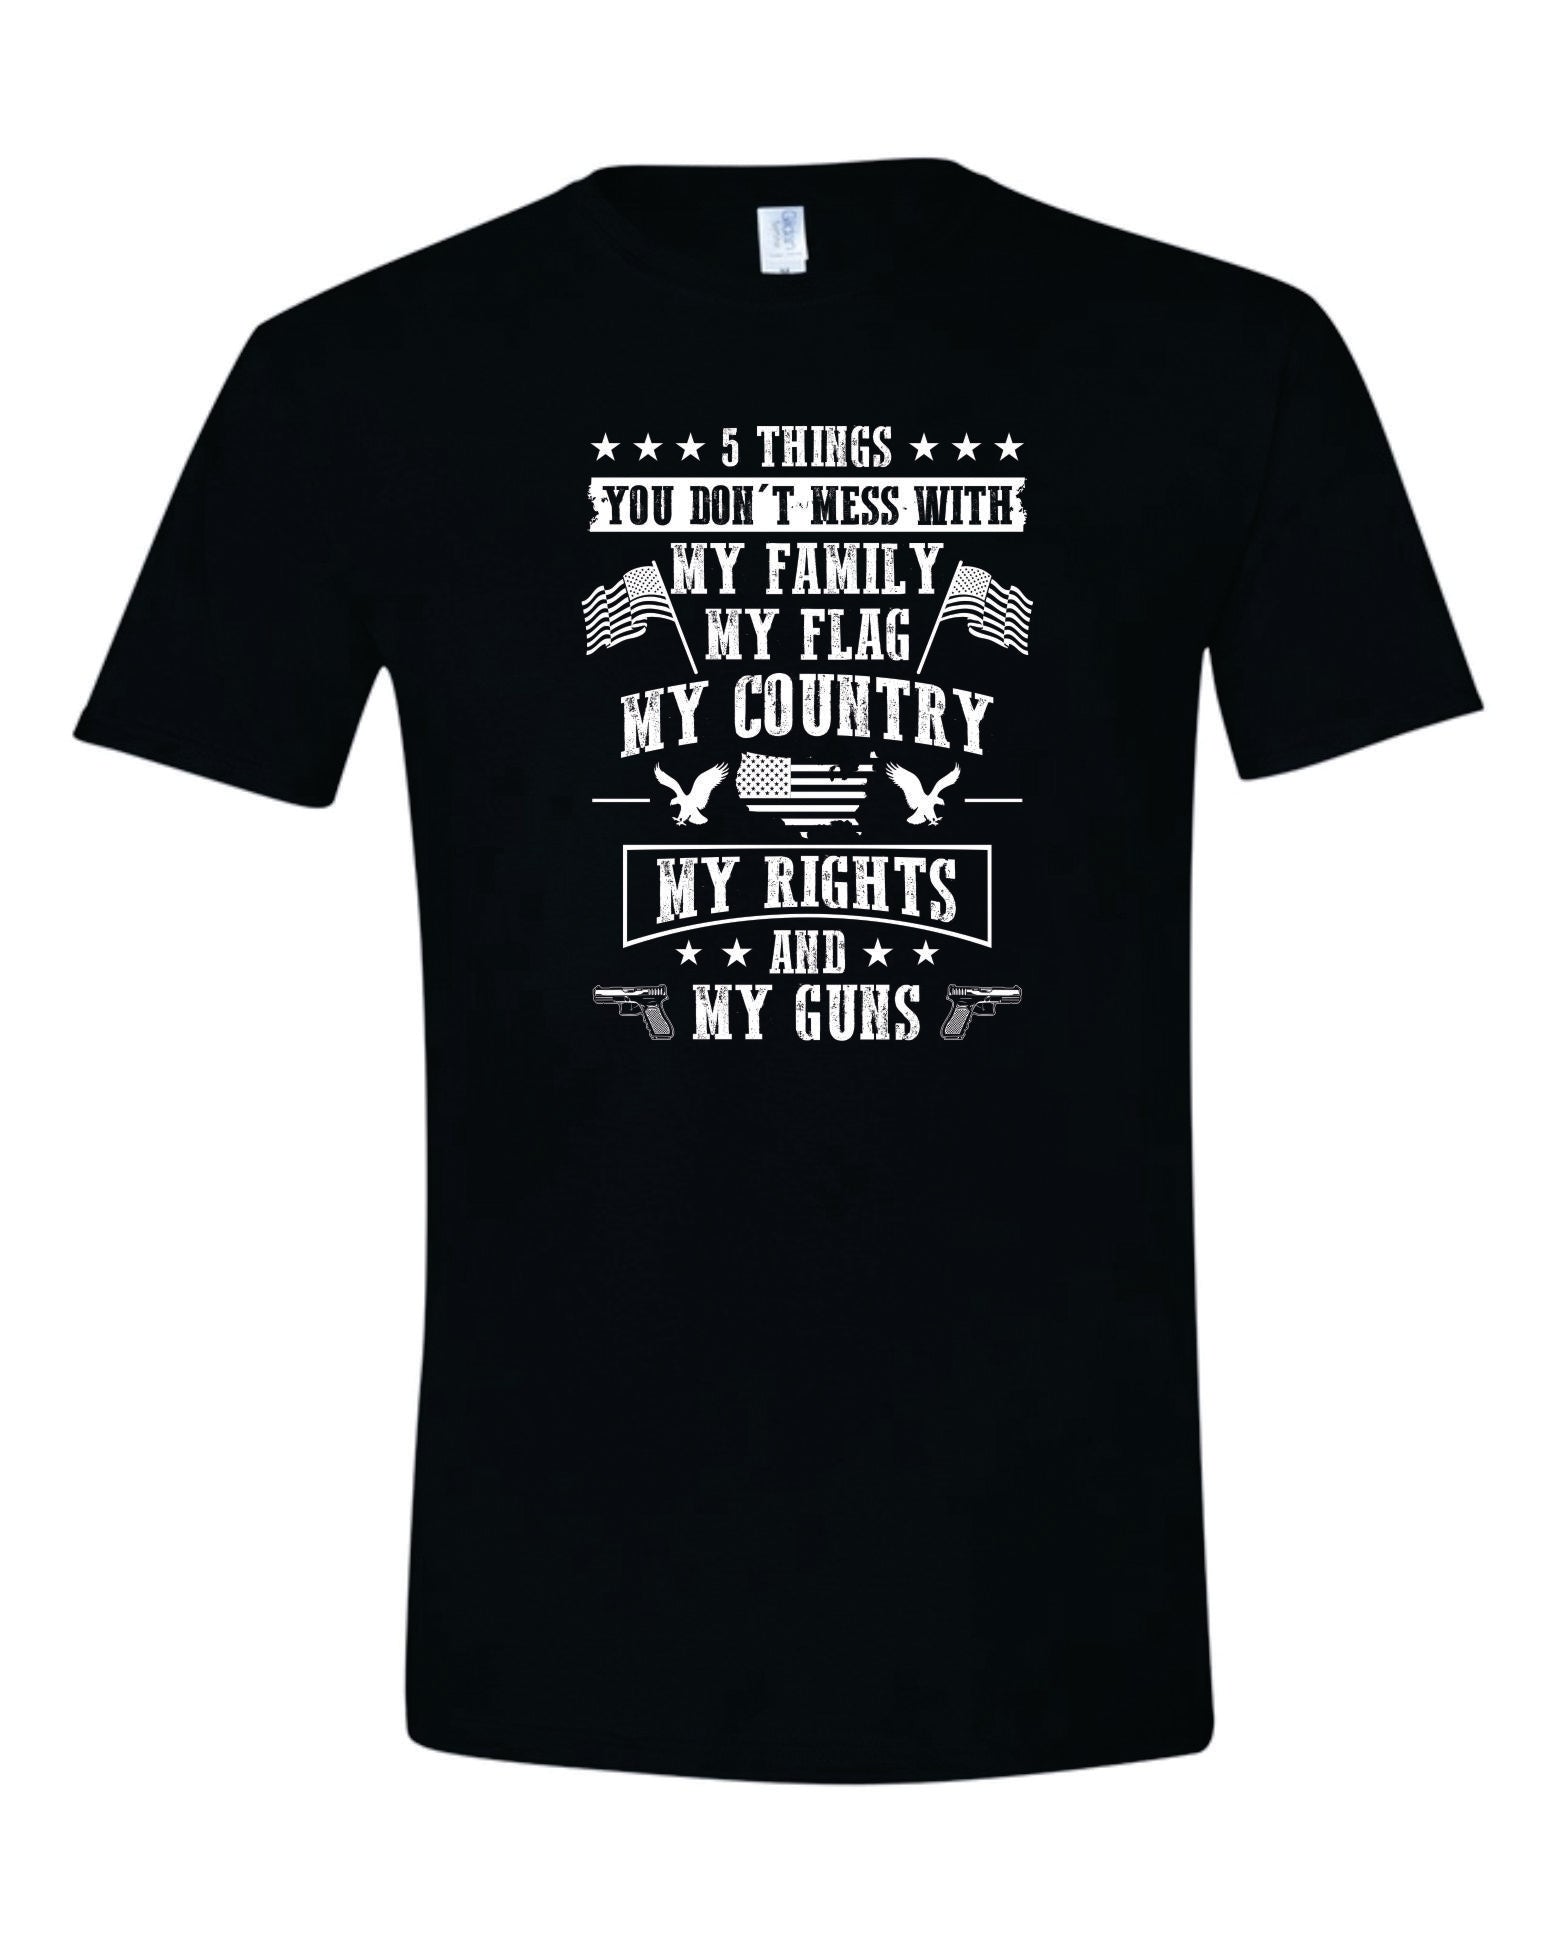 Don't Mess with Family, Flag, Country - Patriotic T-Shirt